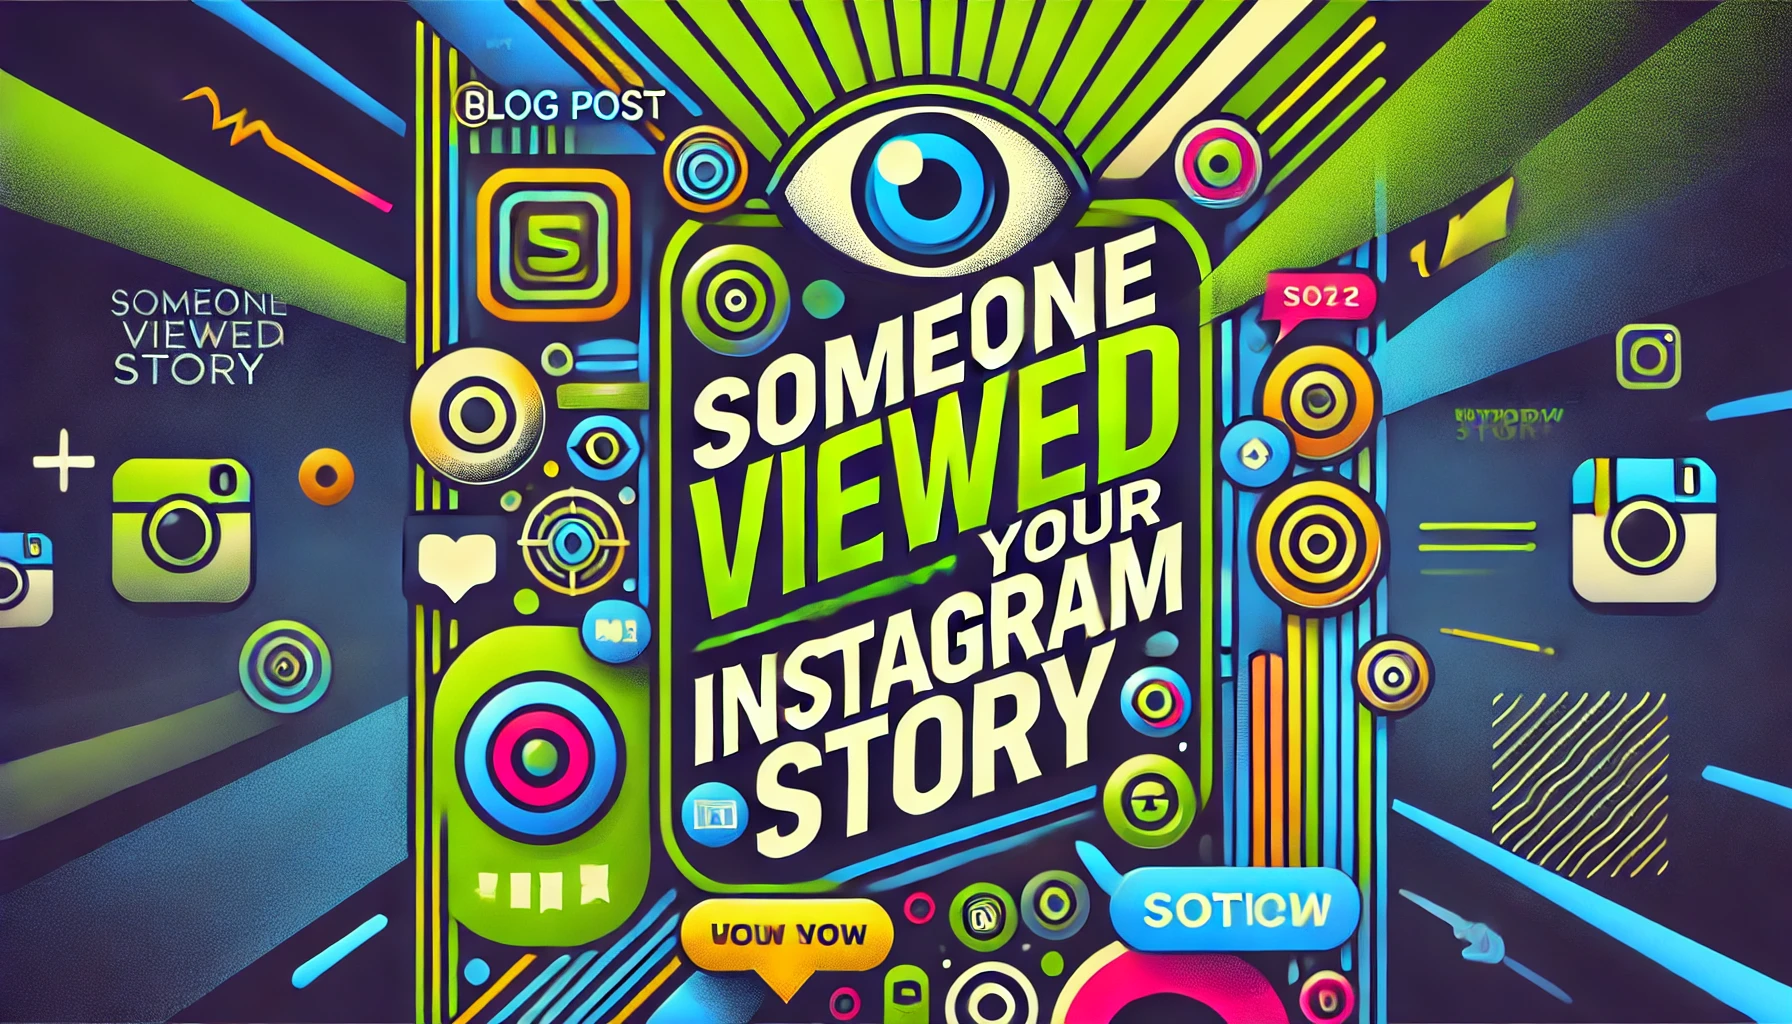 Can You See How Many Times Someone Viewed Your Instagram Story?